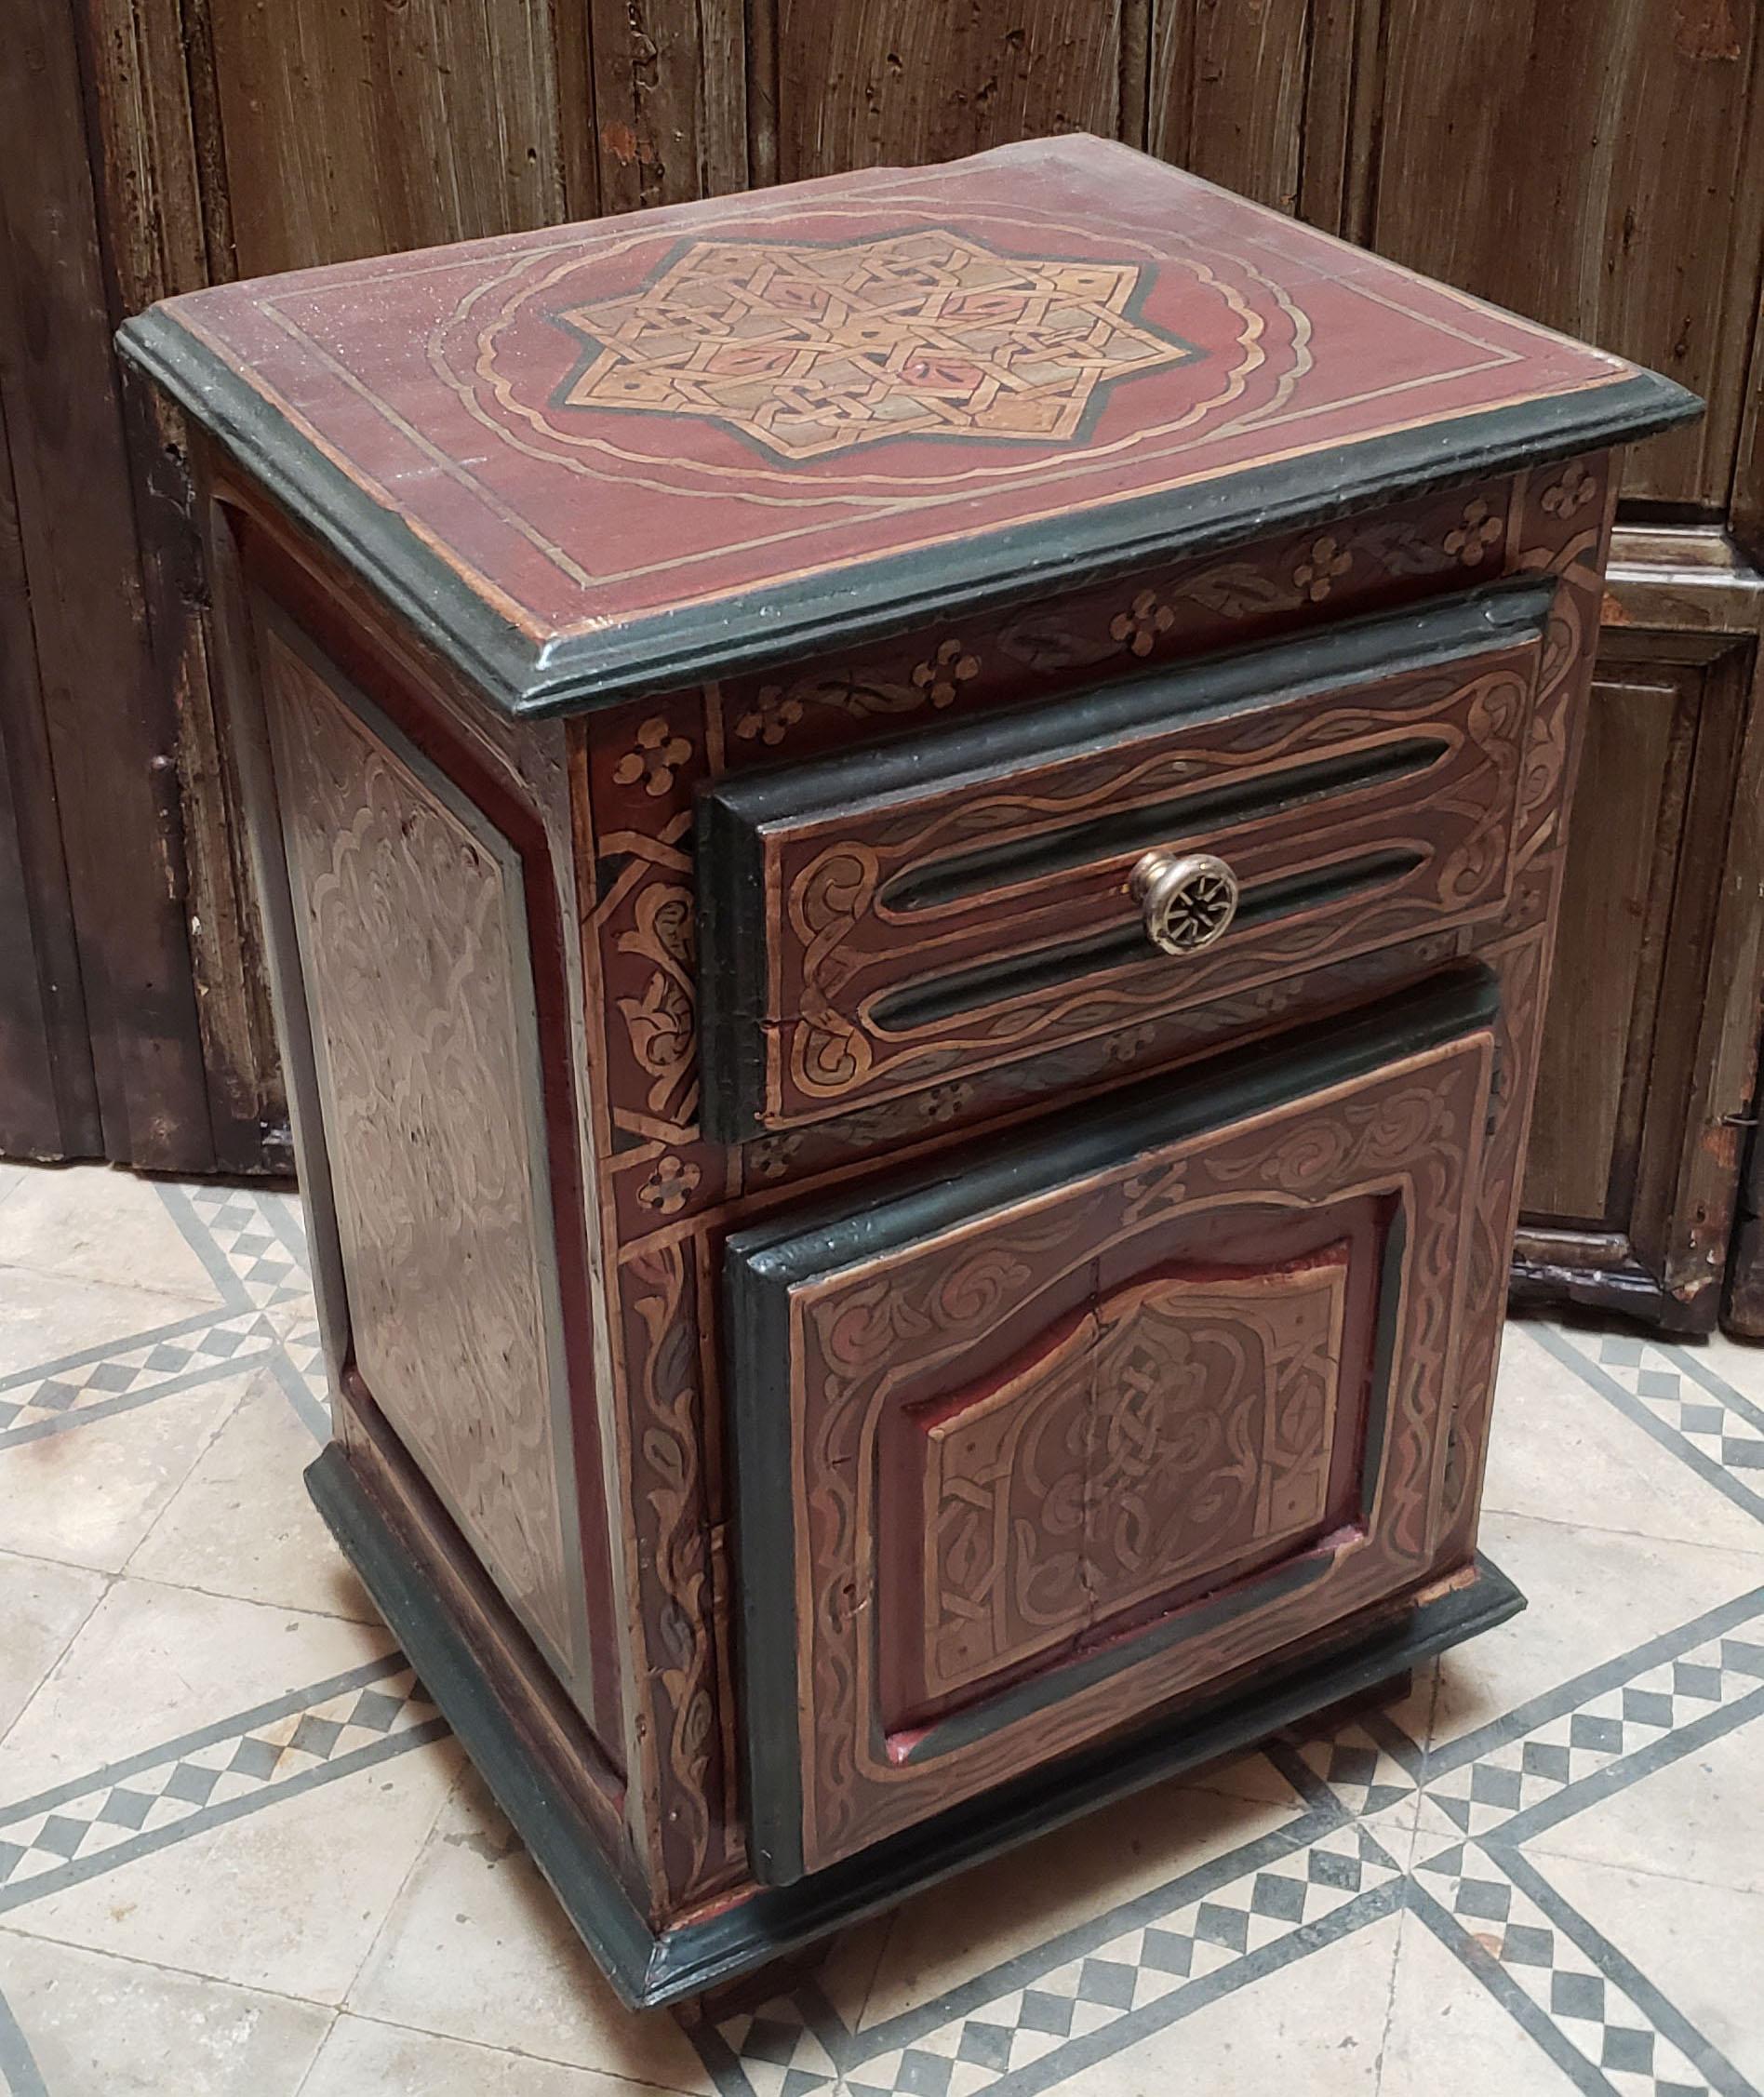 Beautiful antique hand painted nightstand from Morocco, measuring approximately 24